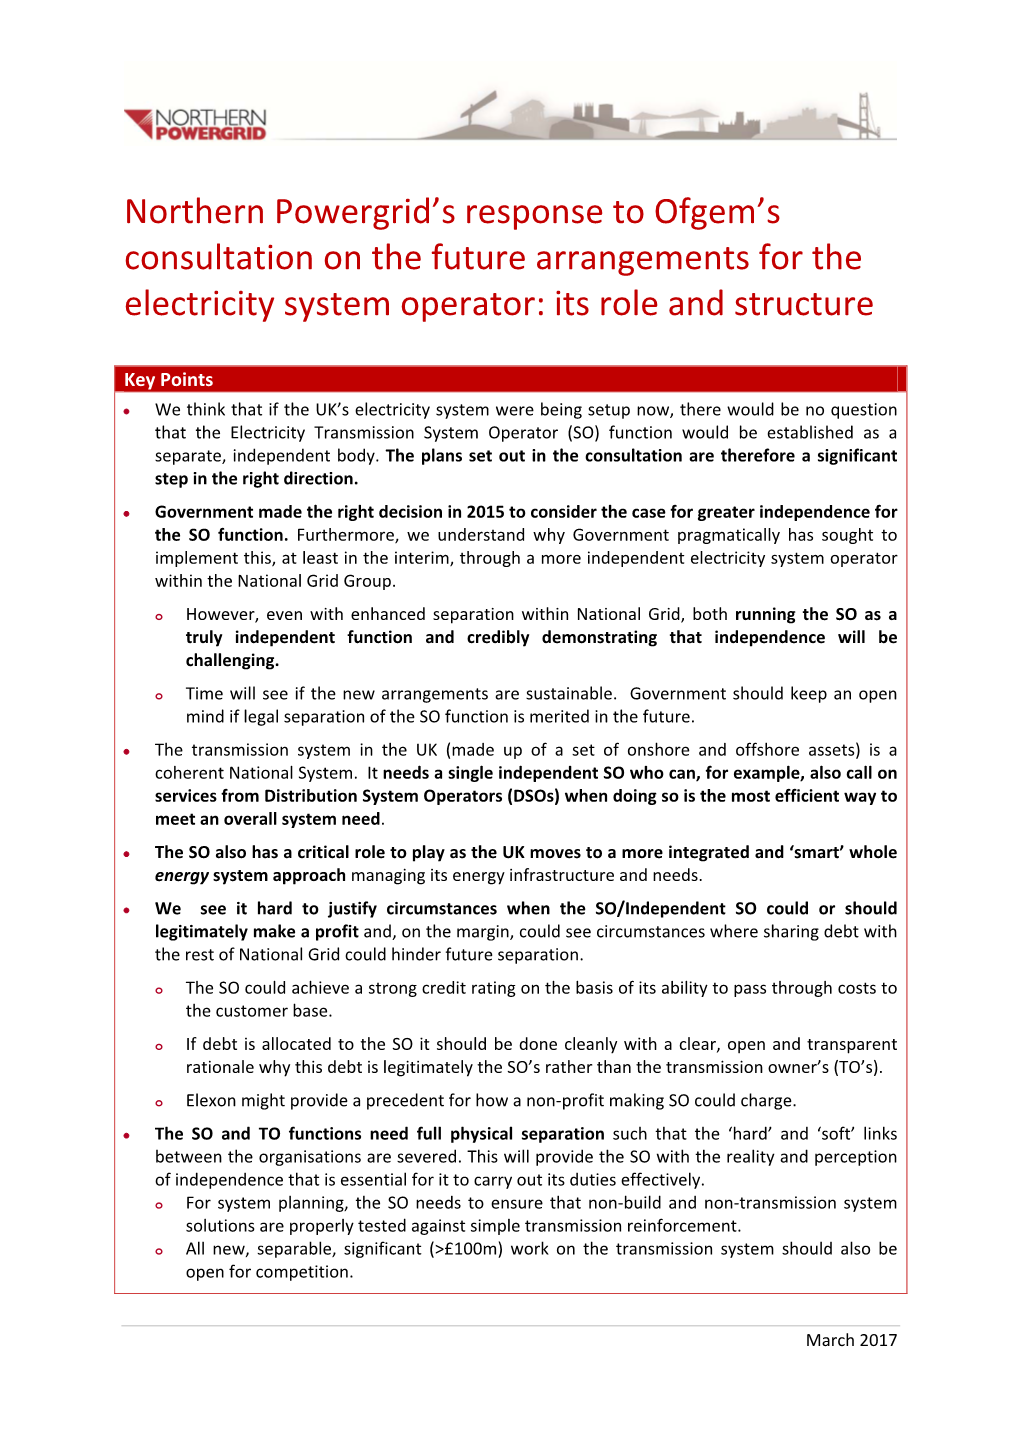 Northern Powergrid's Response to Ofgem's Consultation on the Future Arrangements for the Electricity System Operator: Its Ro